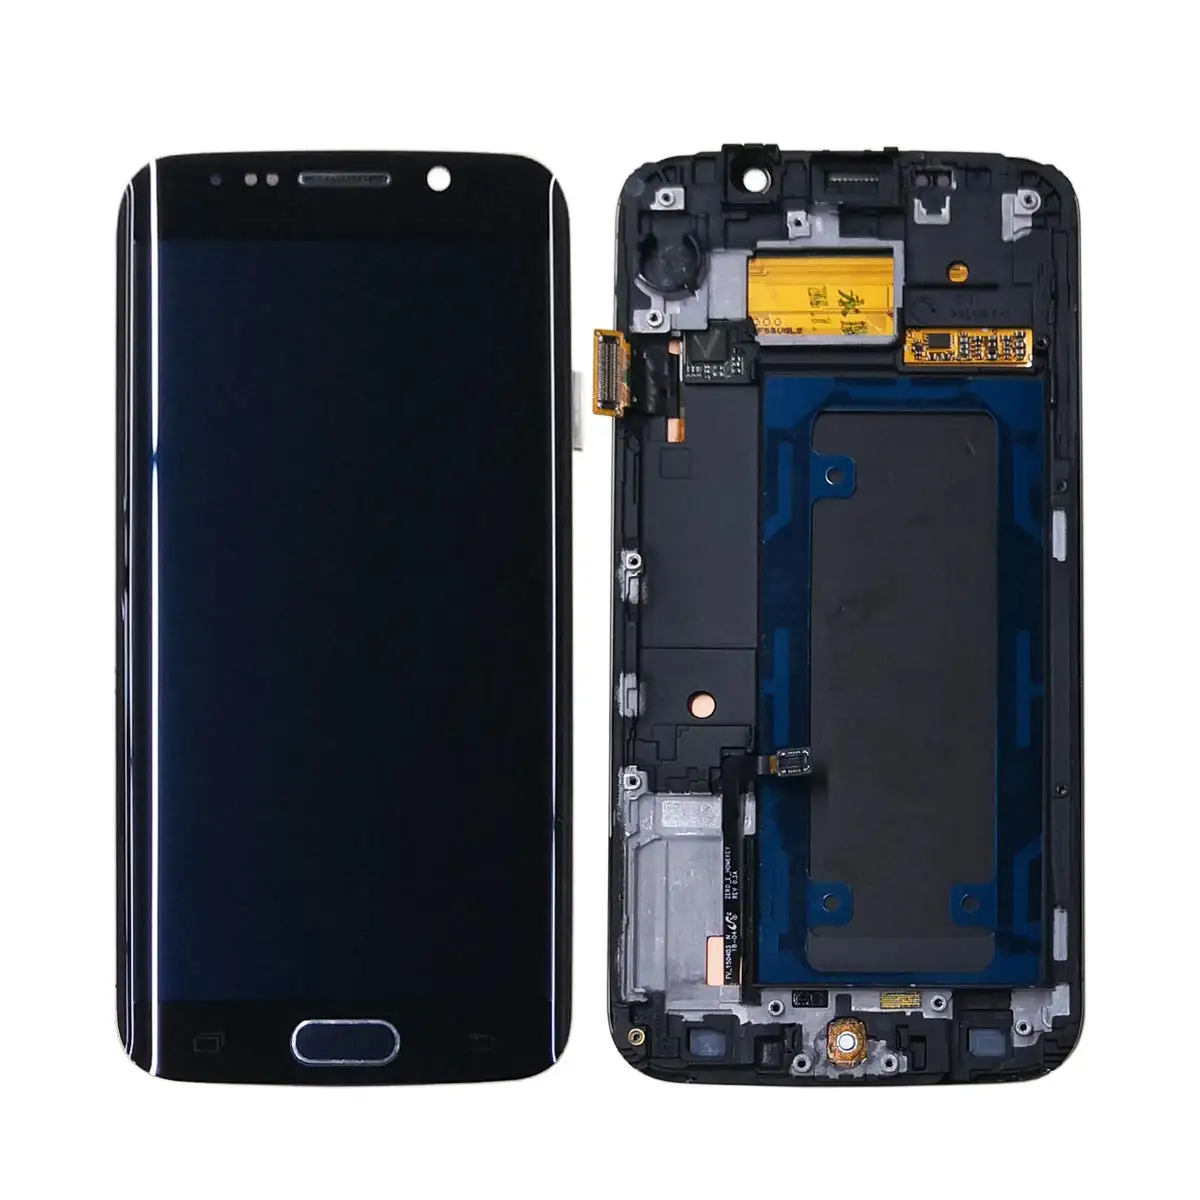 AAA-5-1-OEM-AMOLED-OLCD-For-SAMSUNG-Galaxy-S6-EDGE-LCD-Display-Digitizer-Touch-Screen